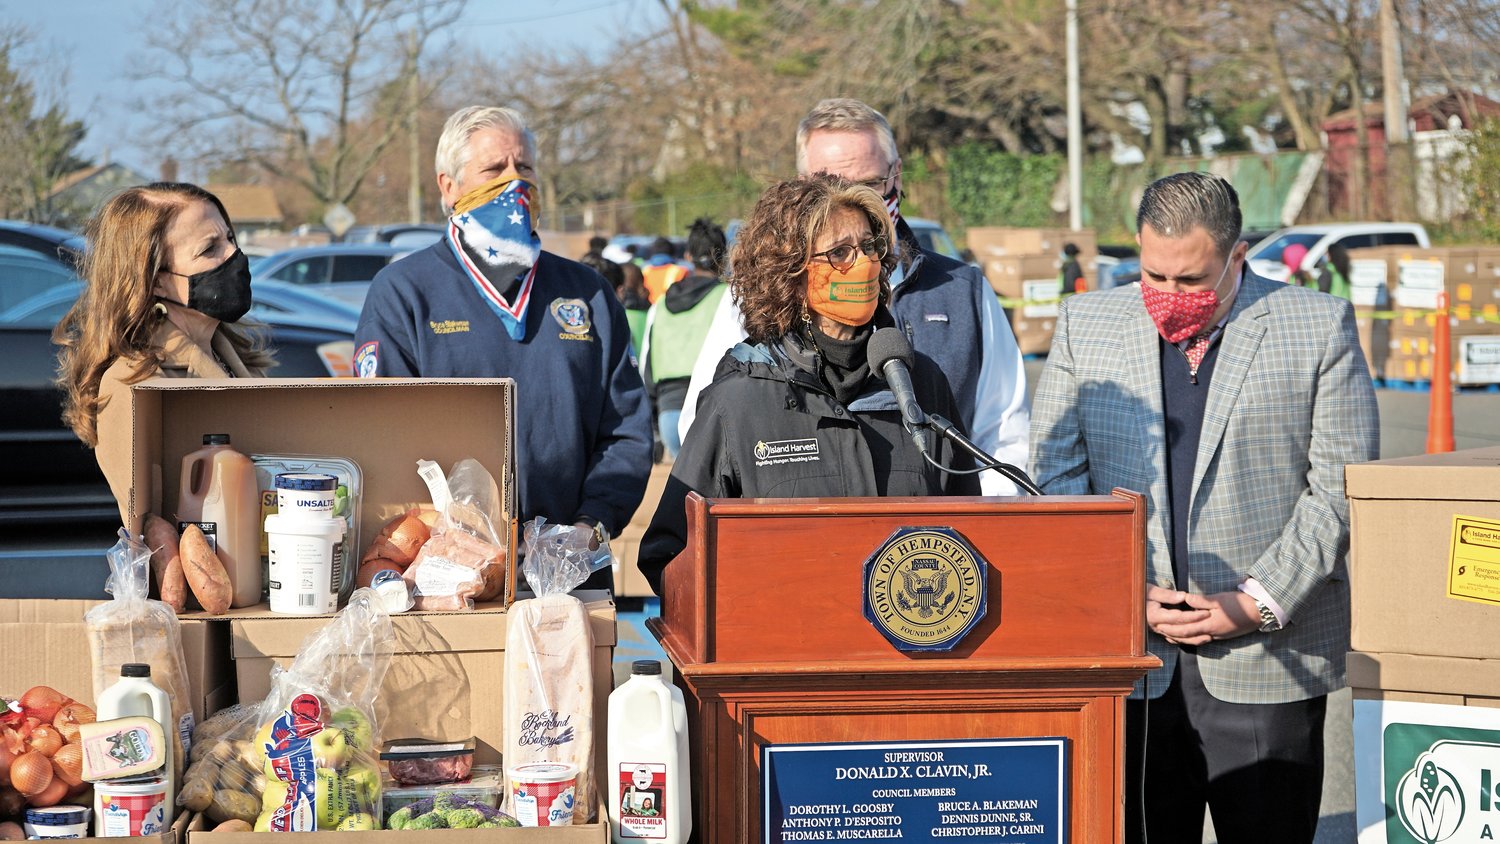 Island Harvest President and CEO Randi Shubin Dresner spoke about food insecurity with town officials at a food distribution event last Friday.